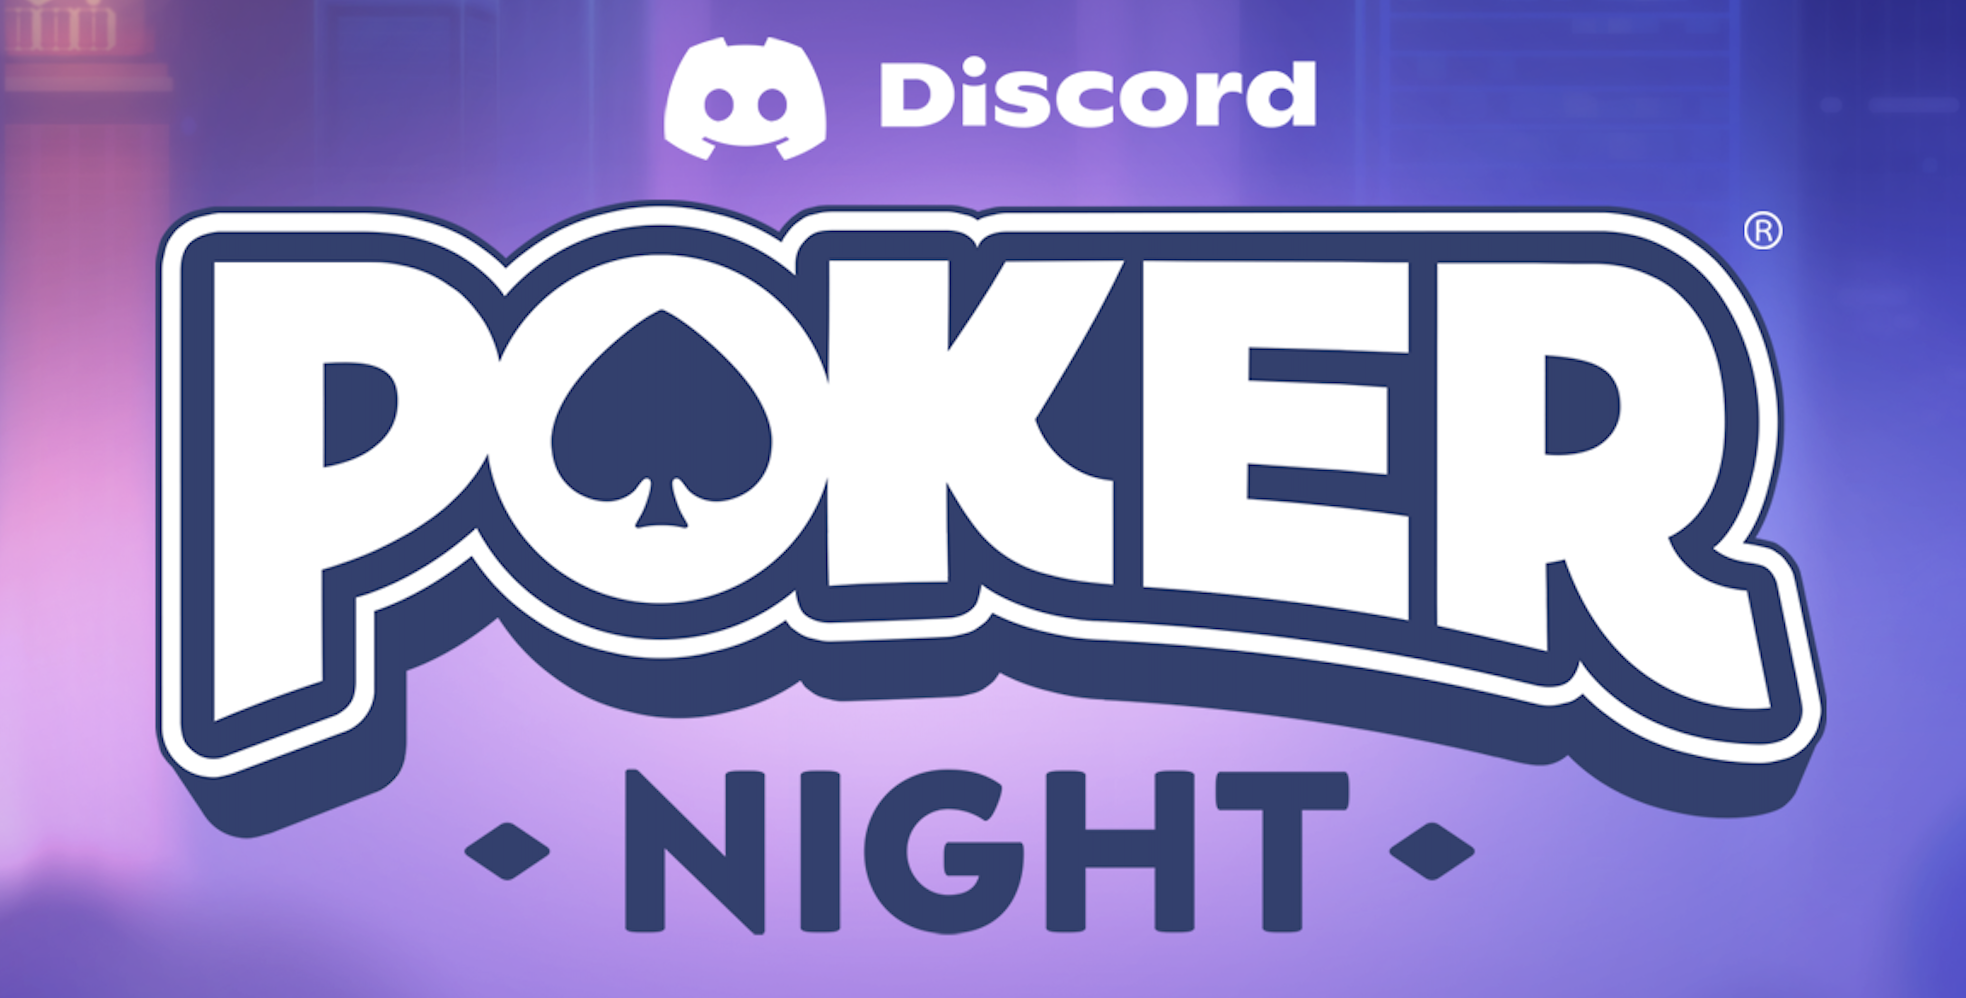 updated-poker-night-banner.png